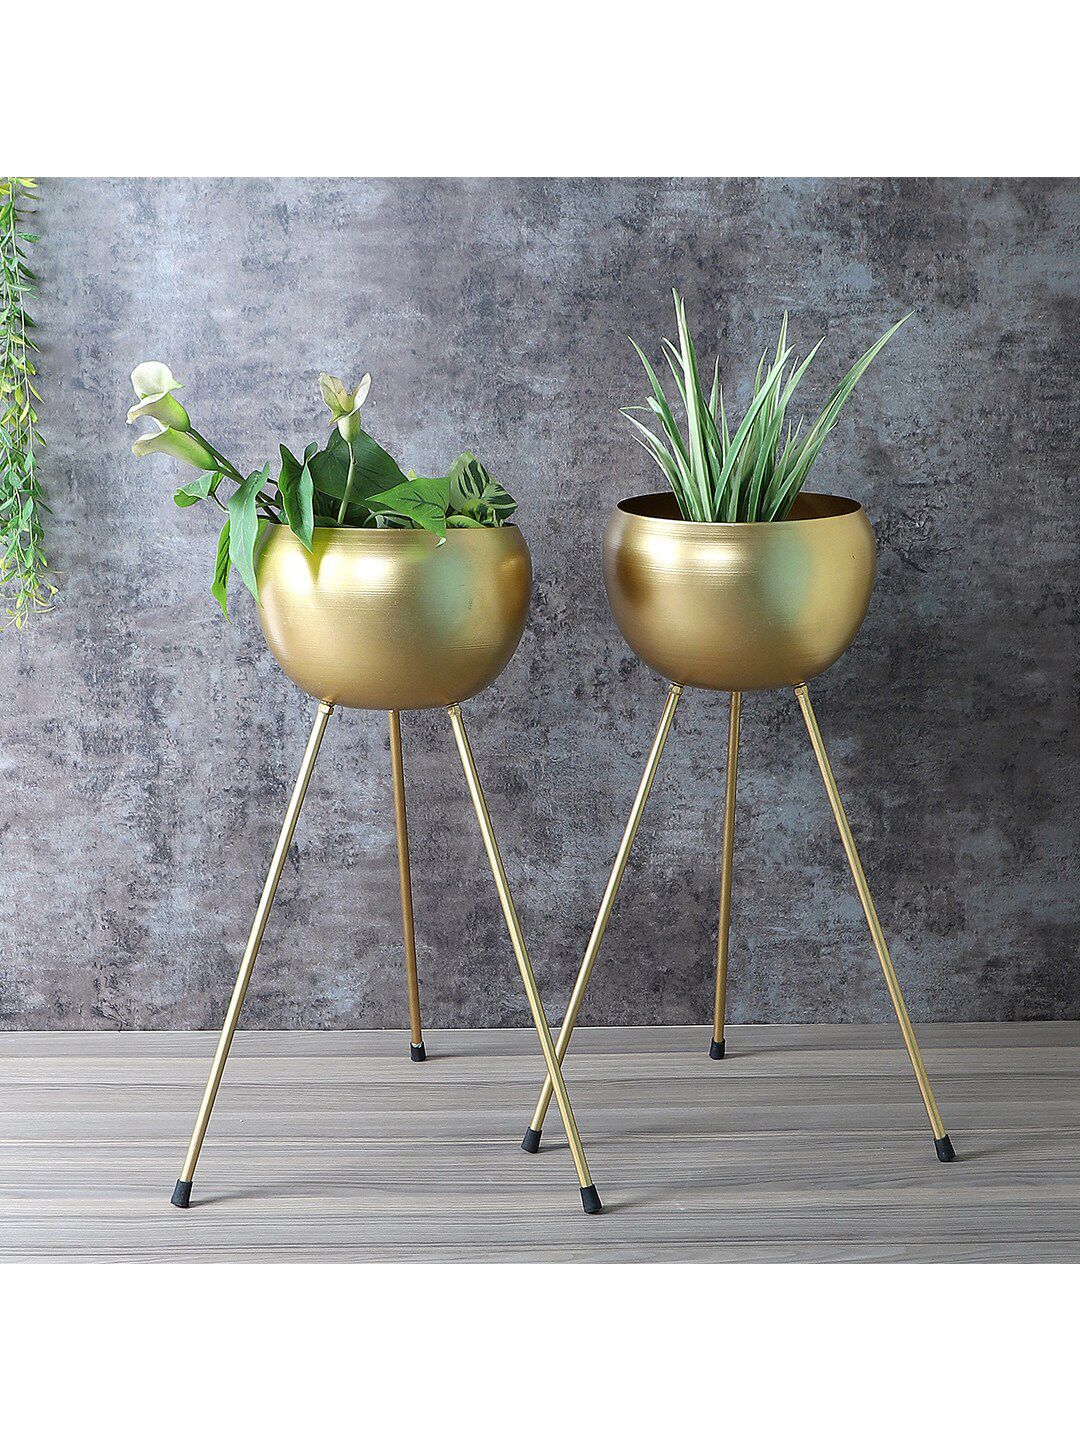 Amaya Decors Set Of 2 Gold-Toned Solid Planters With Stand Price in India